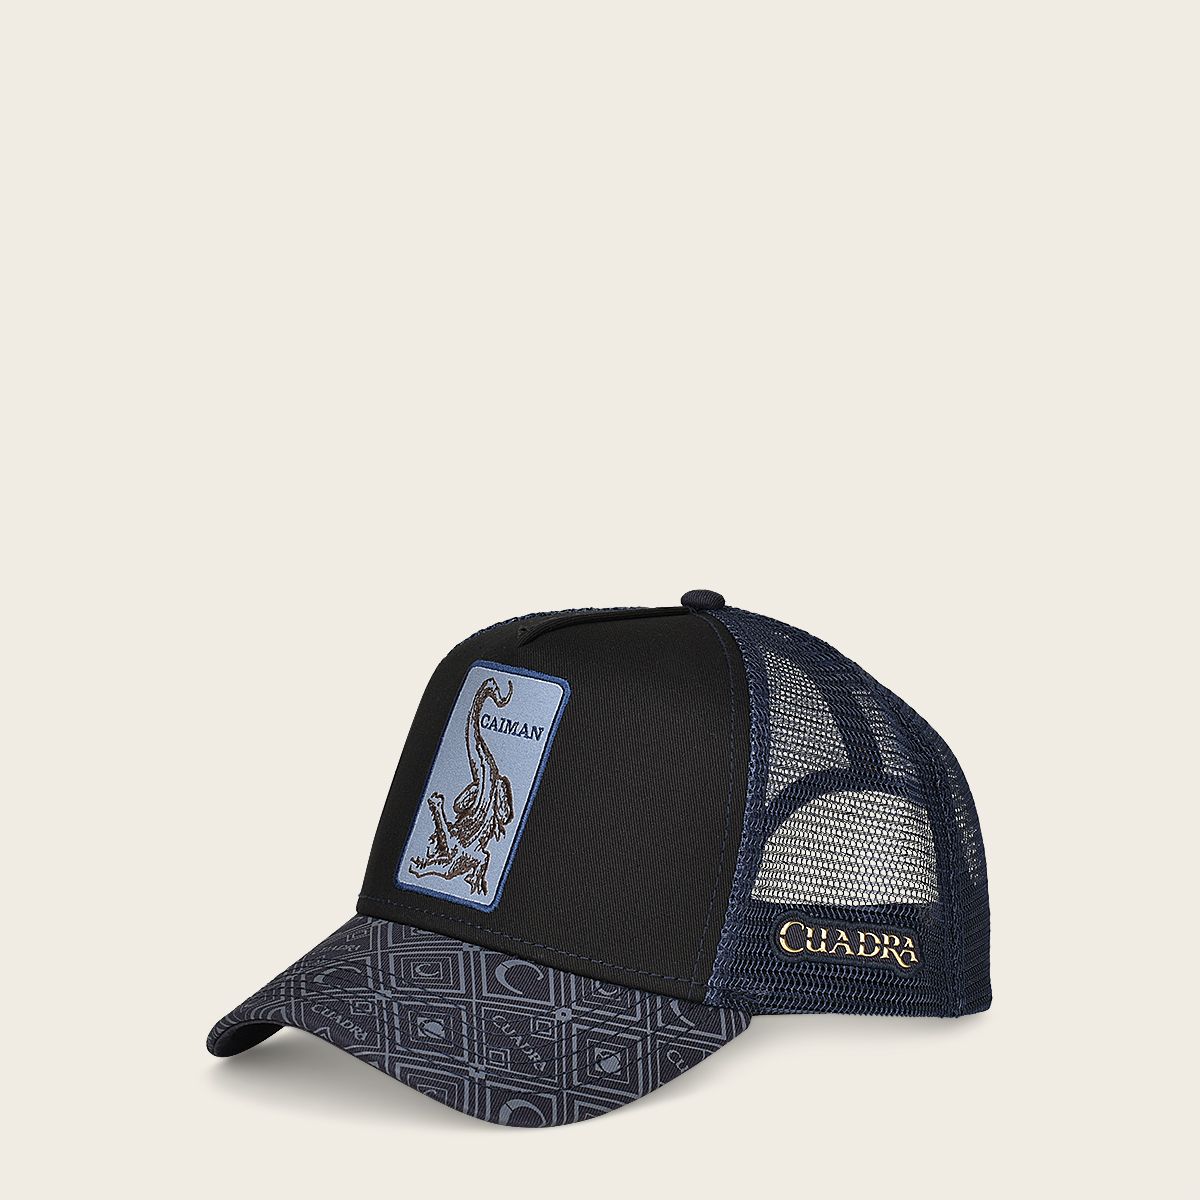 Blue snapback cap with alligator patch